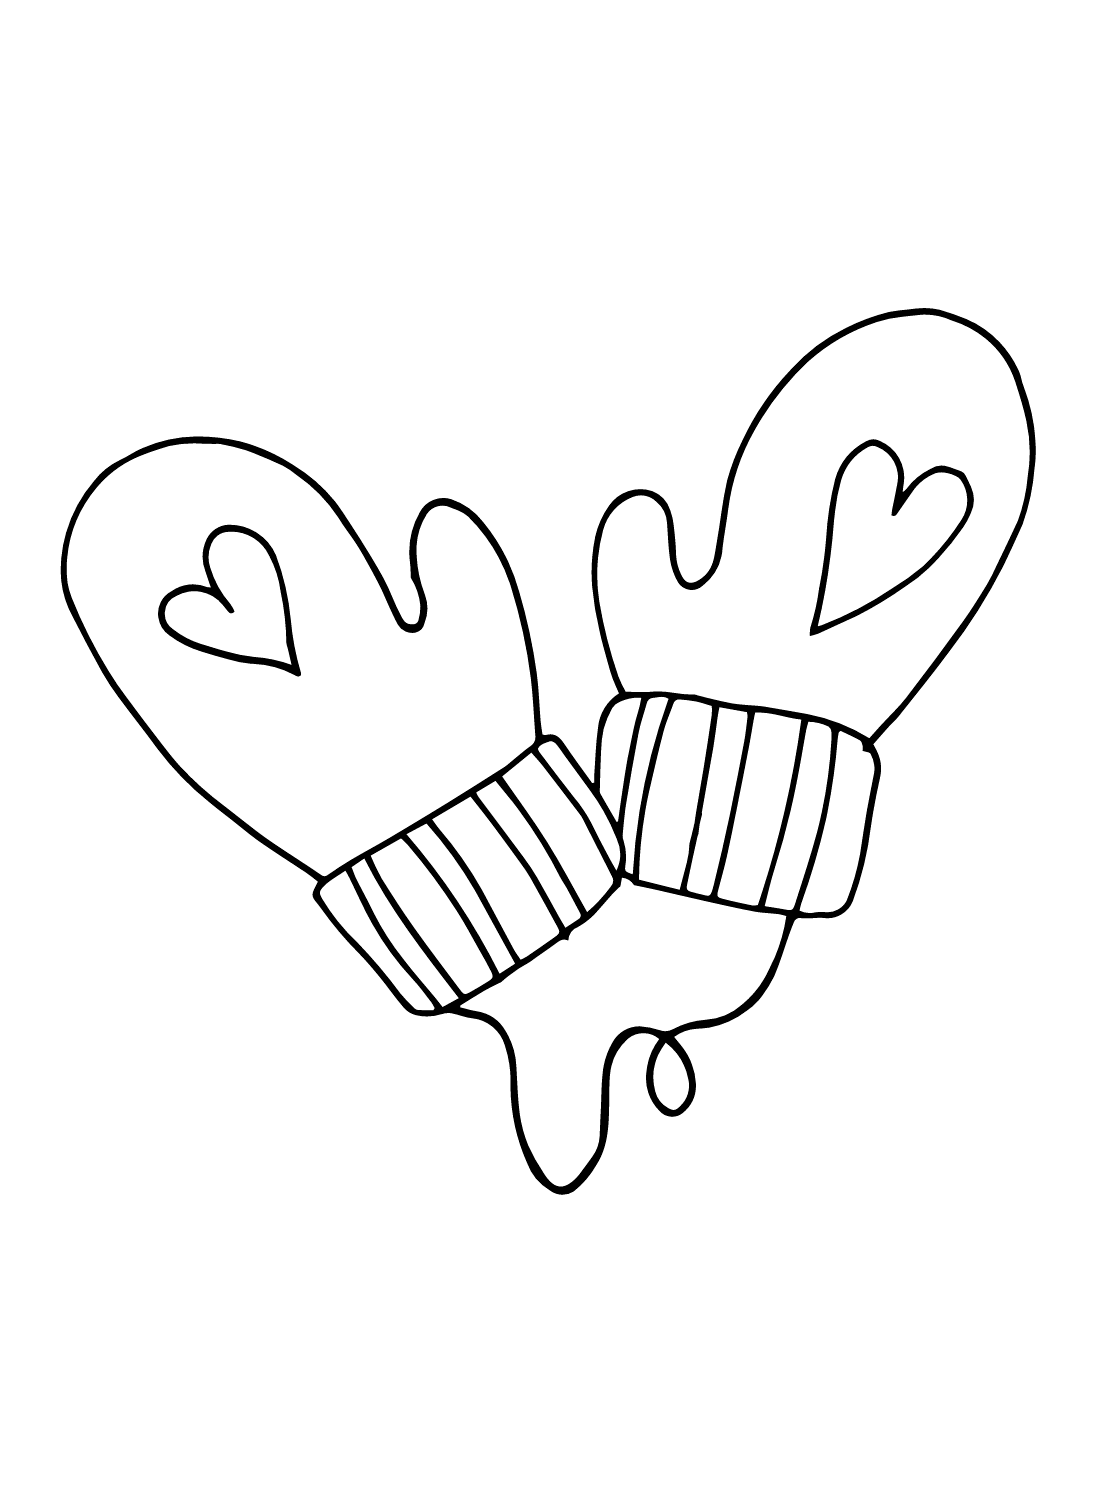 Mittens with Heart Pattern Coloring Page